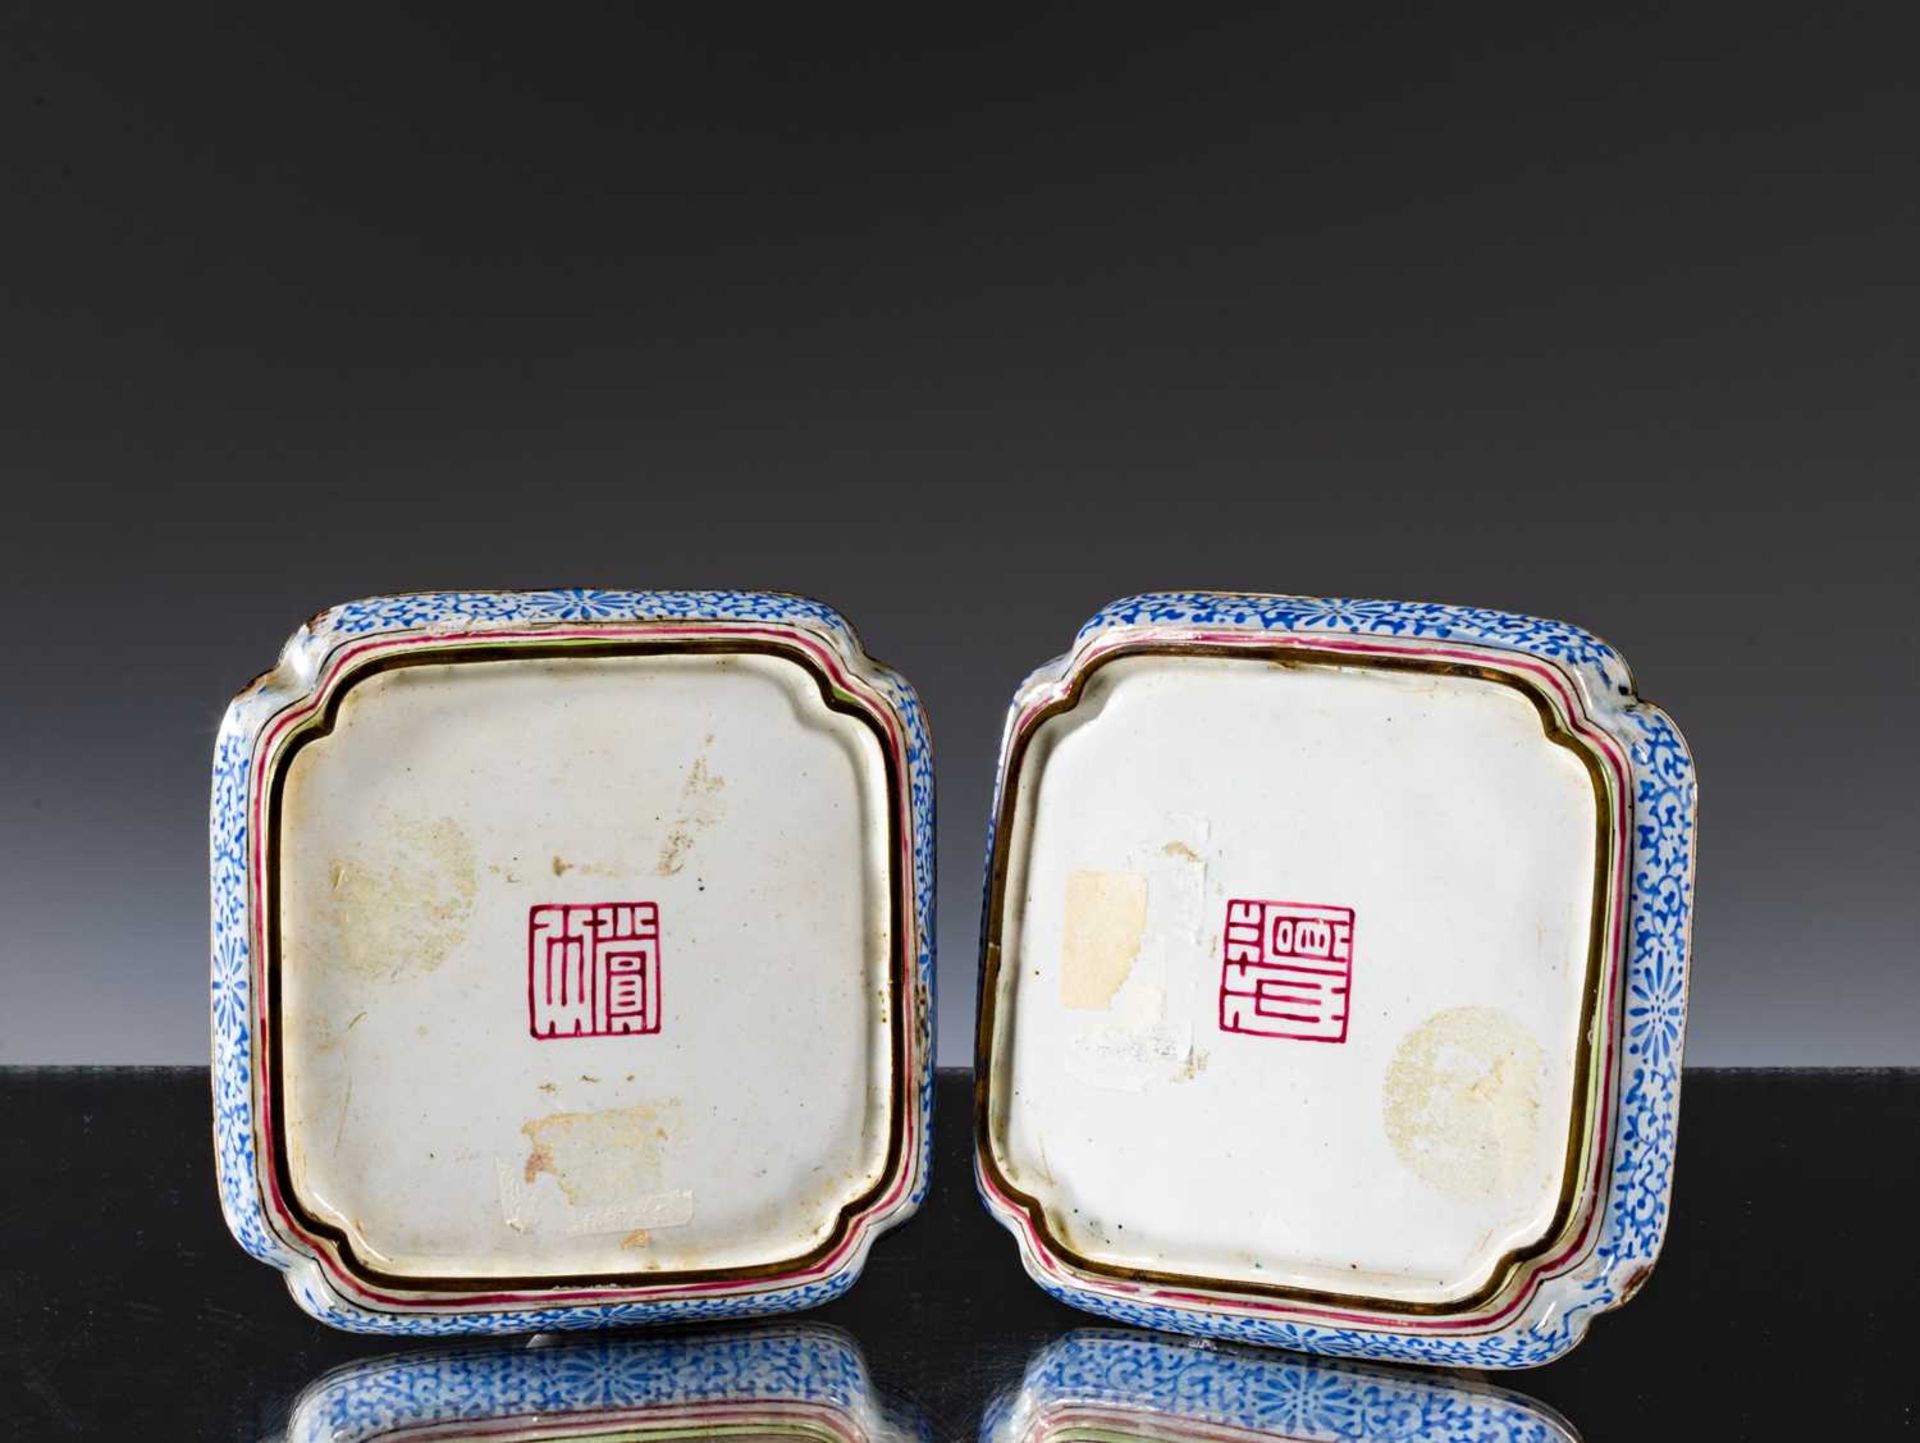 SET OF CLOISONNE BOXES - Image 12 of 15